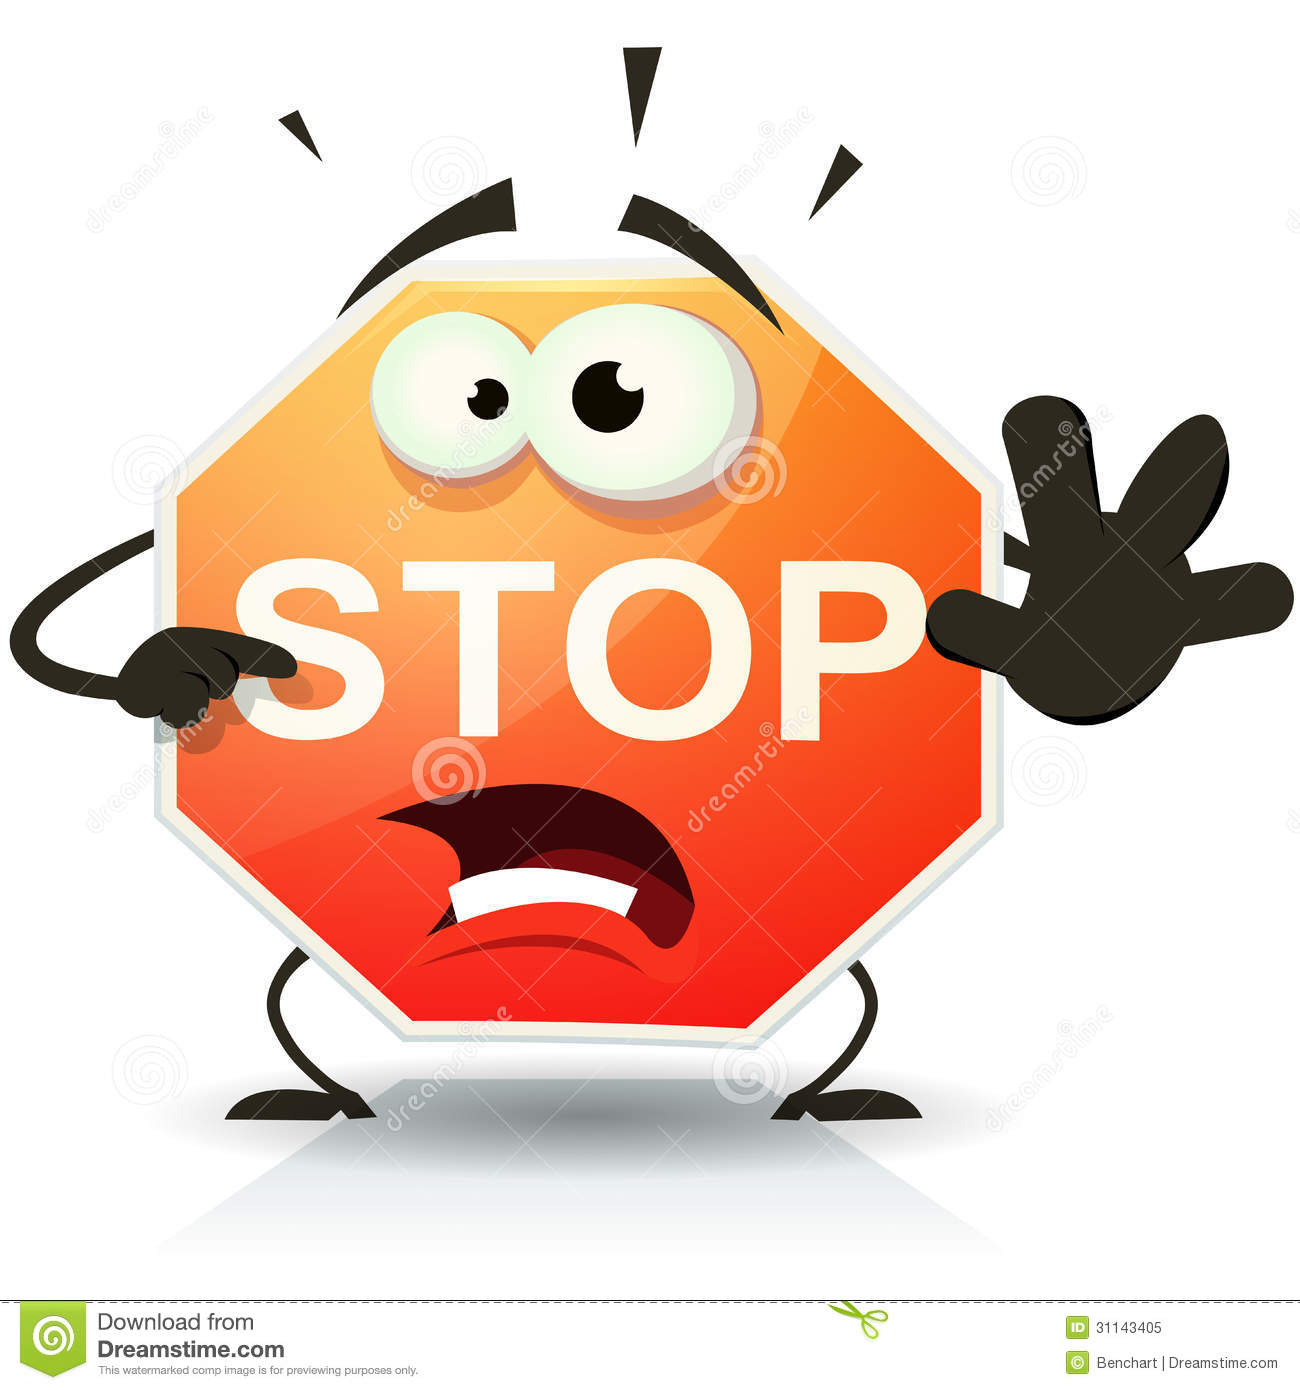 Illustration Of A Funny Cartoon Stop Traffic Sign Character Doing